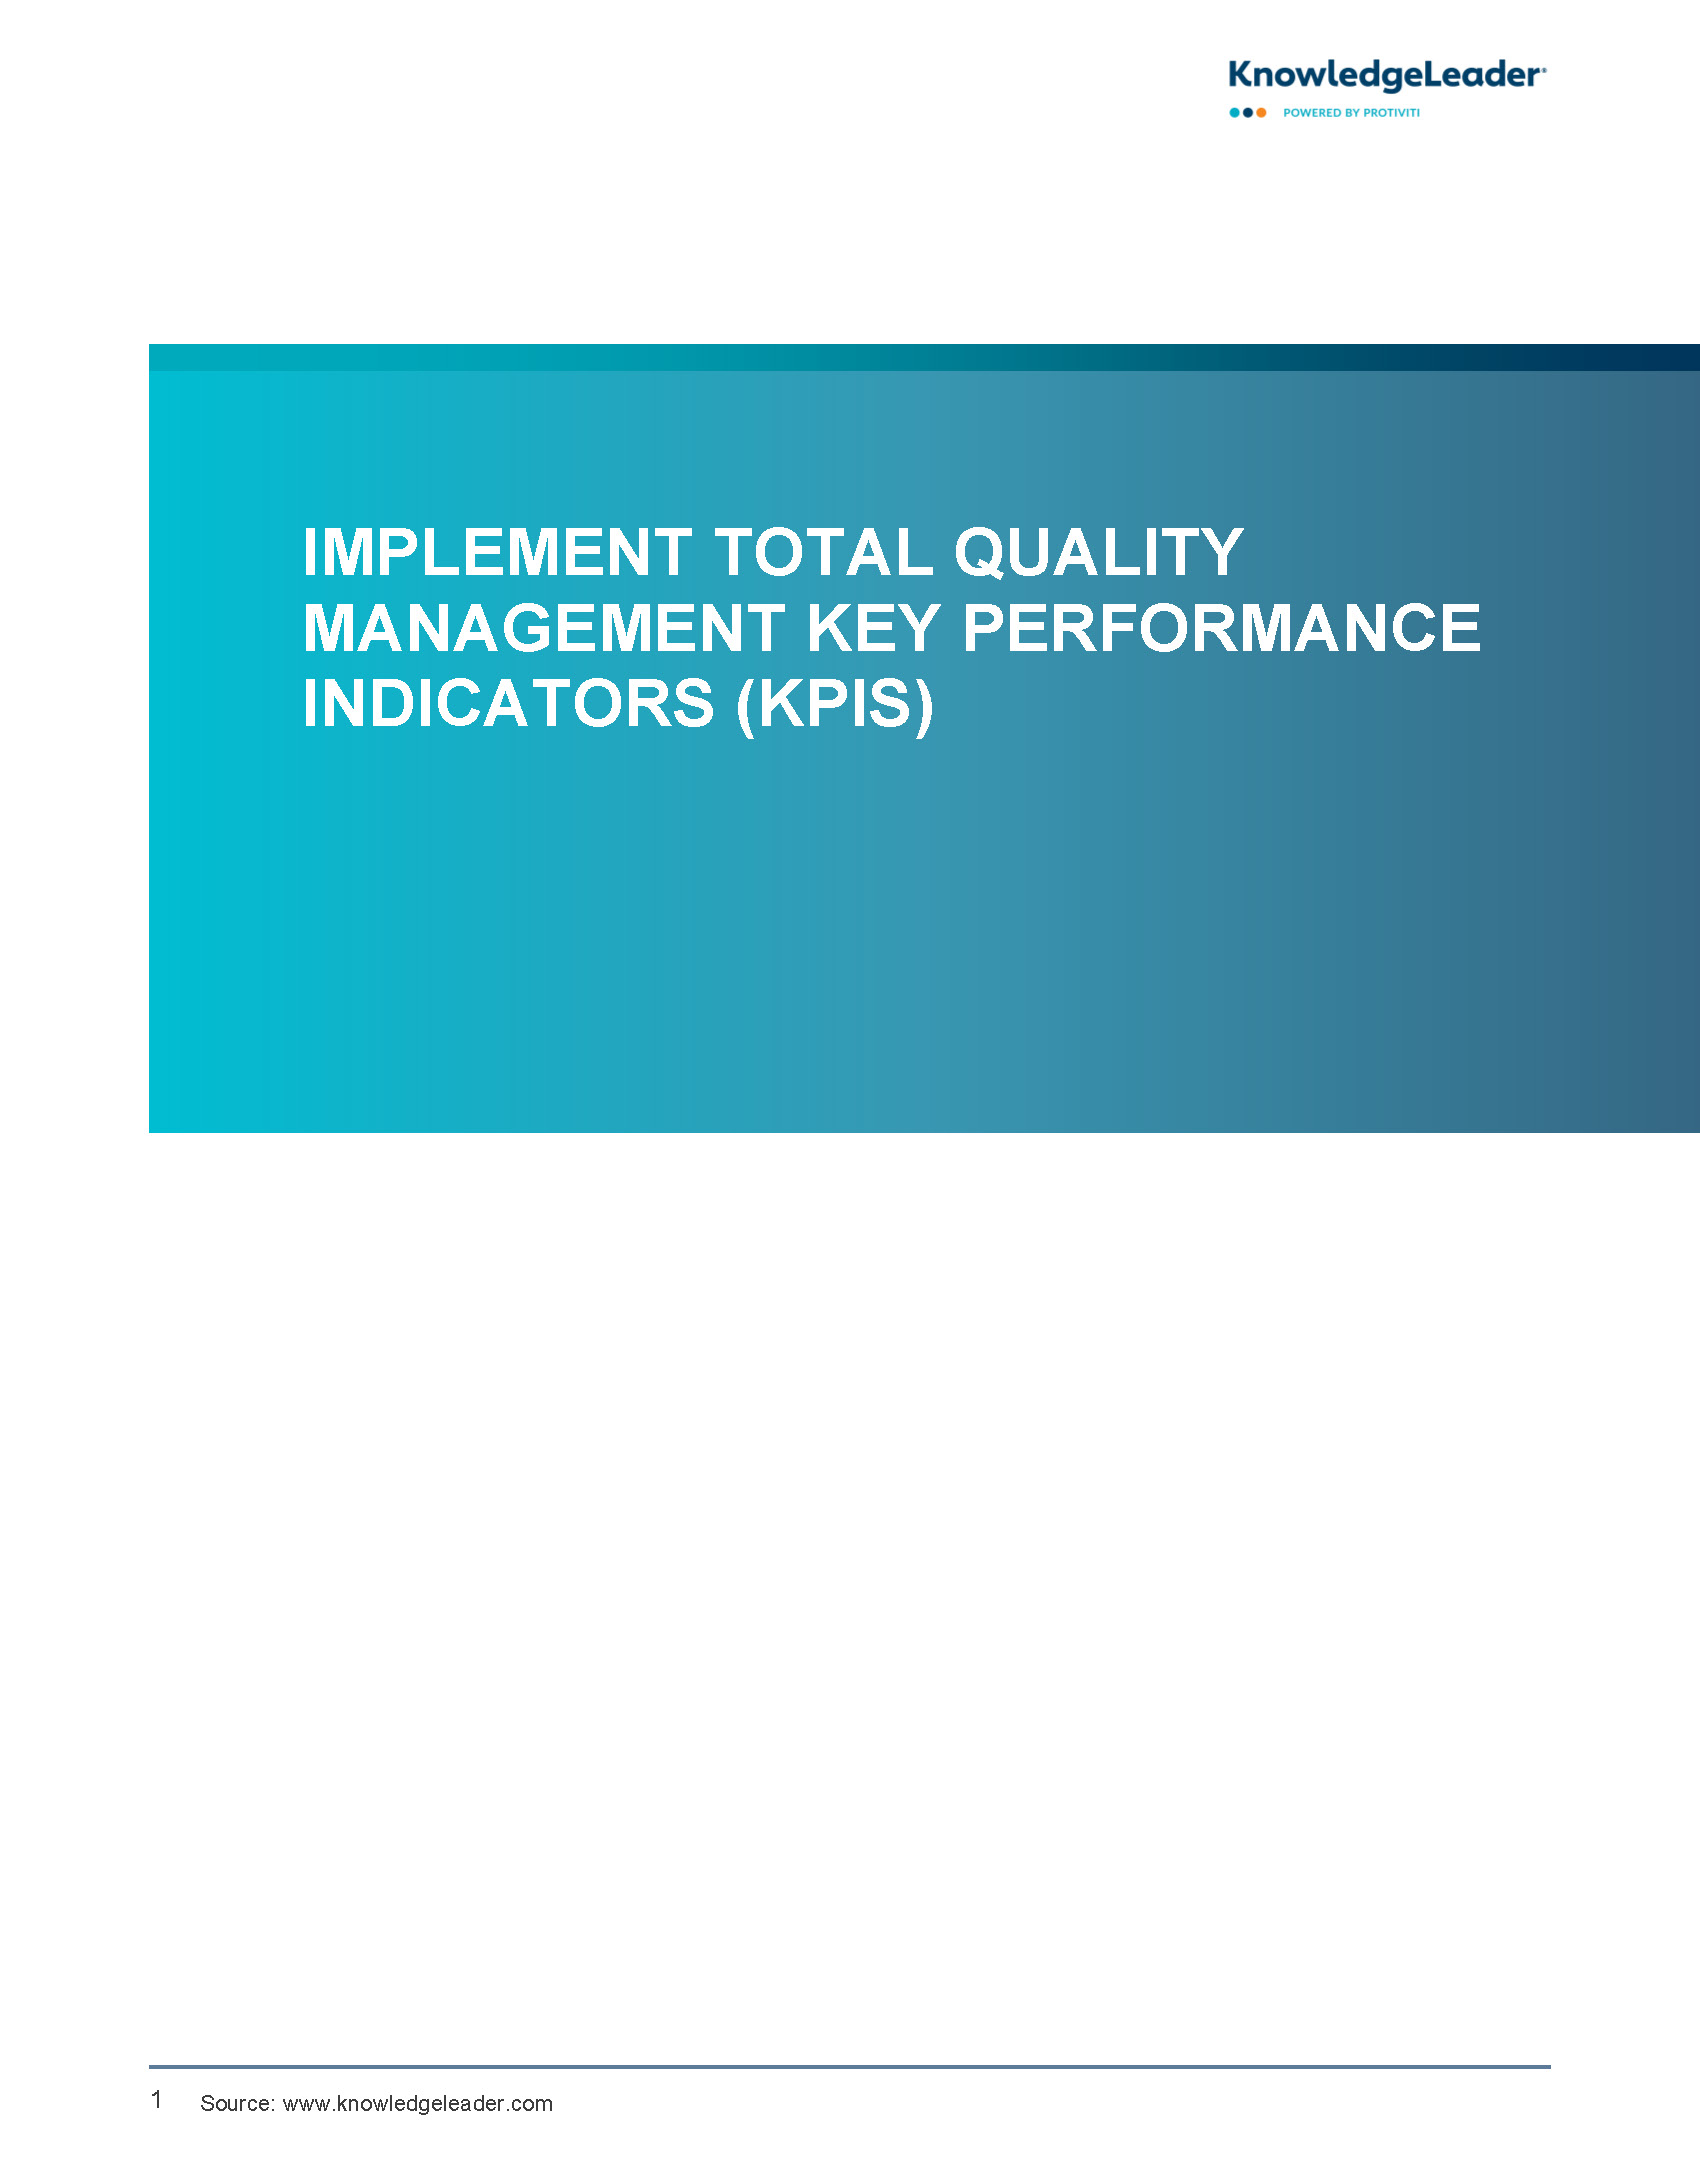 Screenshot of the first page of Implement Total Quality Management Key Performance Indicators (KPIs)